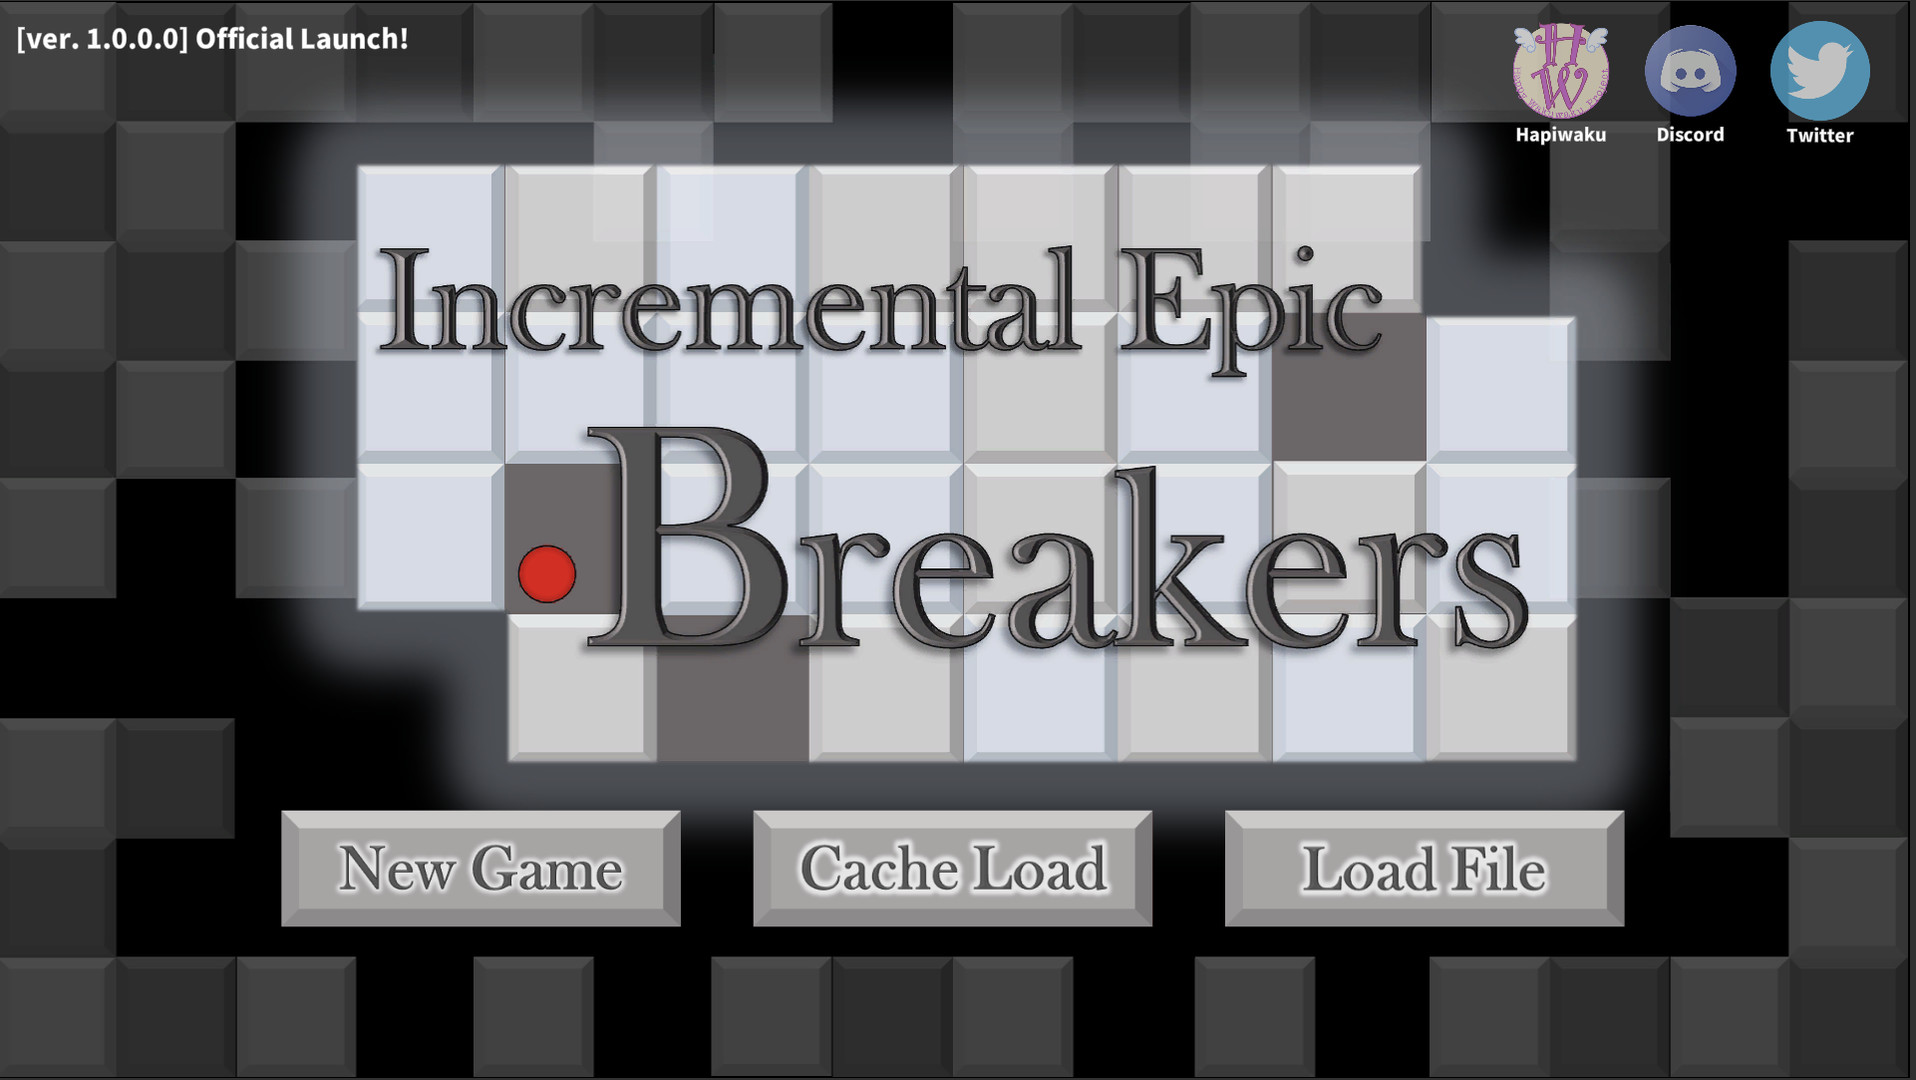 Incremental Epic Breakers - Daily Quest Pack Featured Screenshot #1